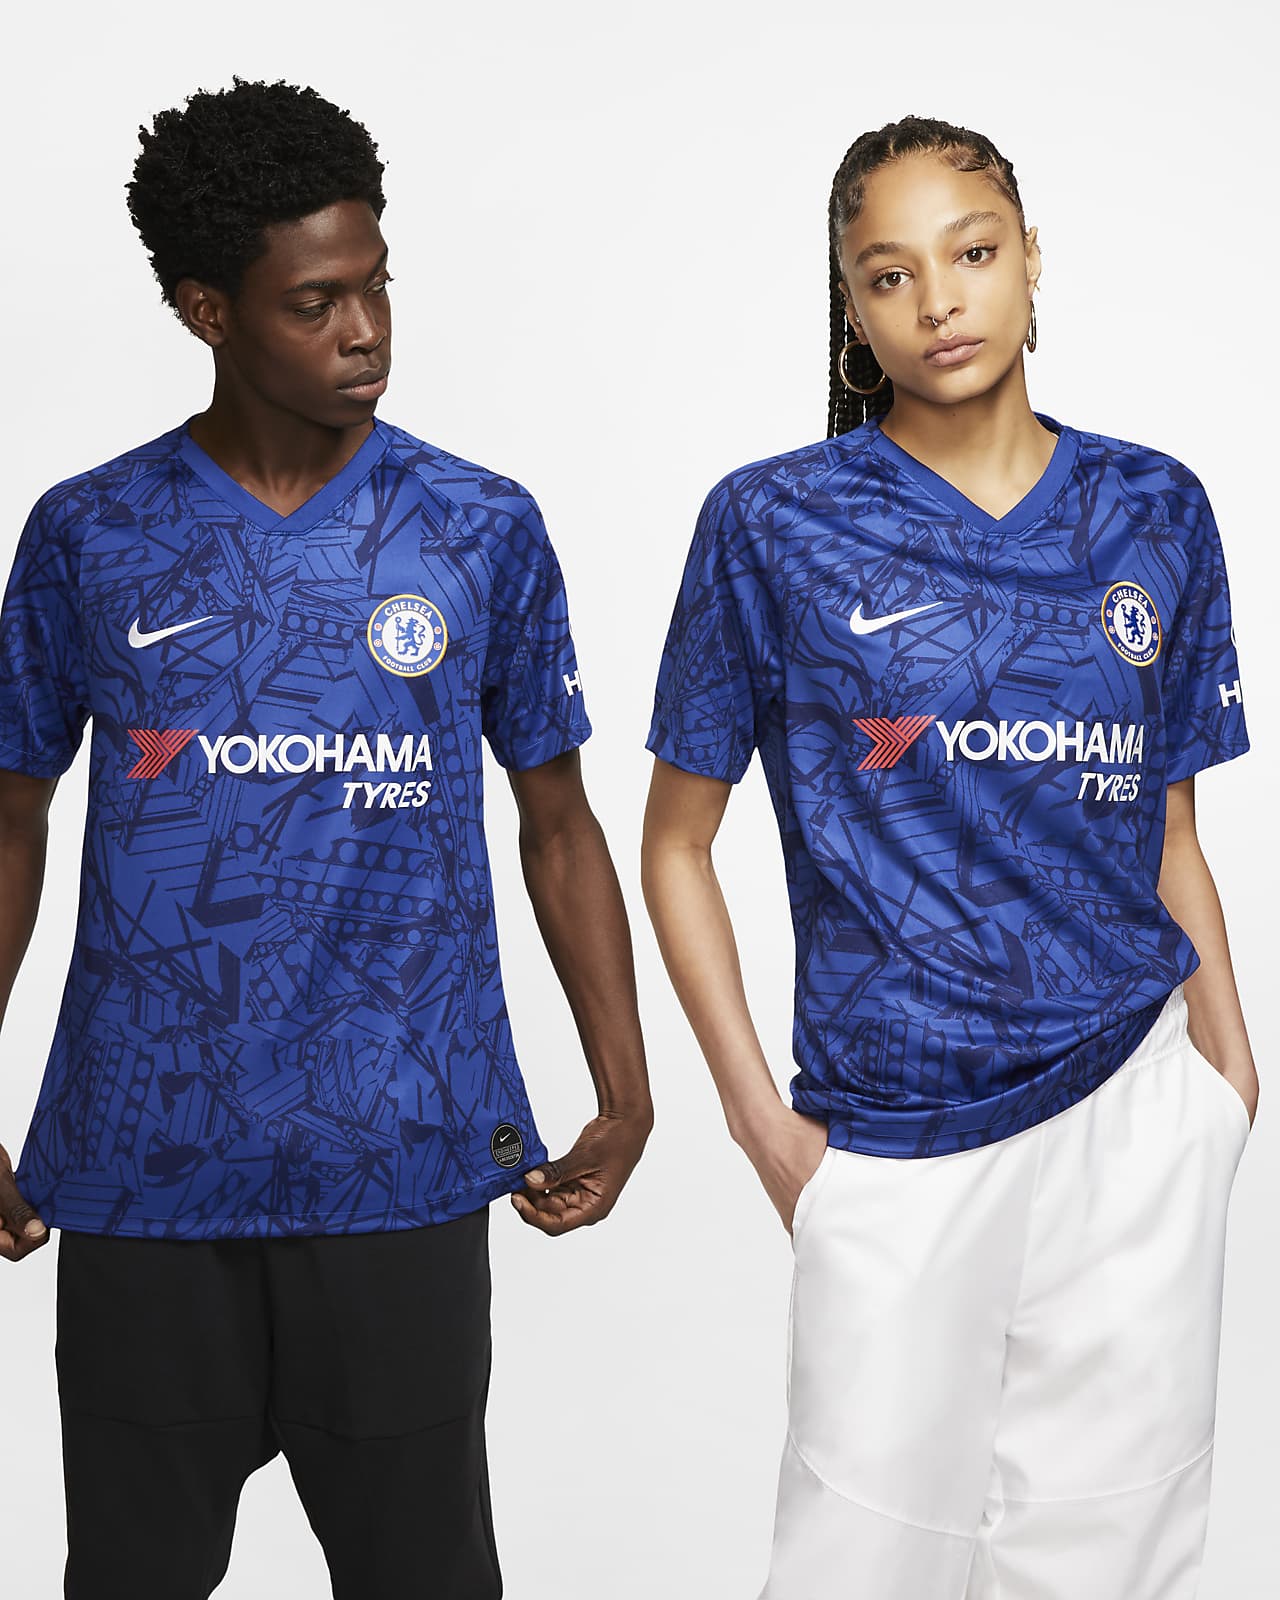 Chelsea Fc Pictures 2019